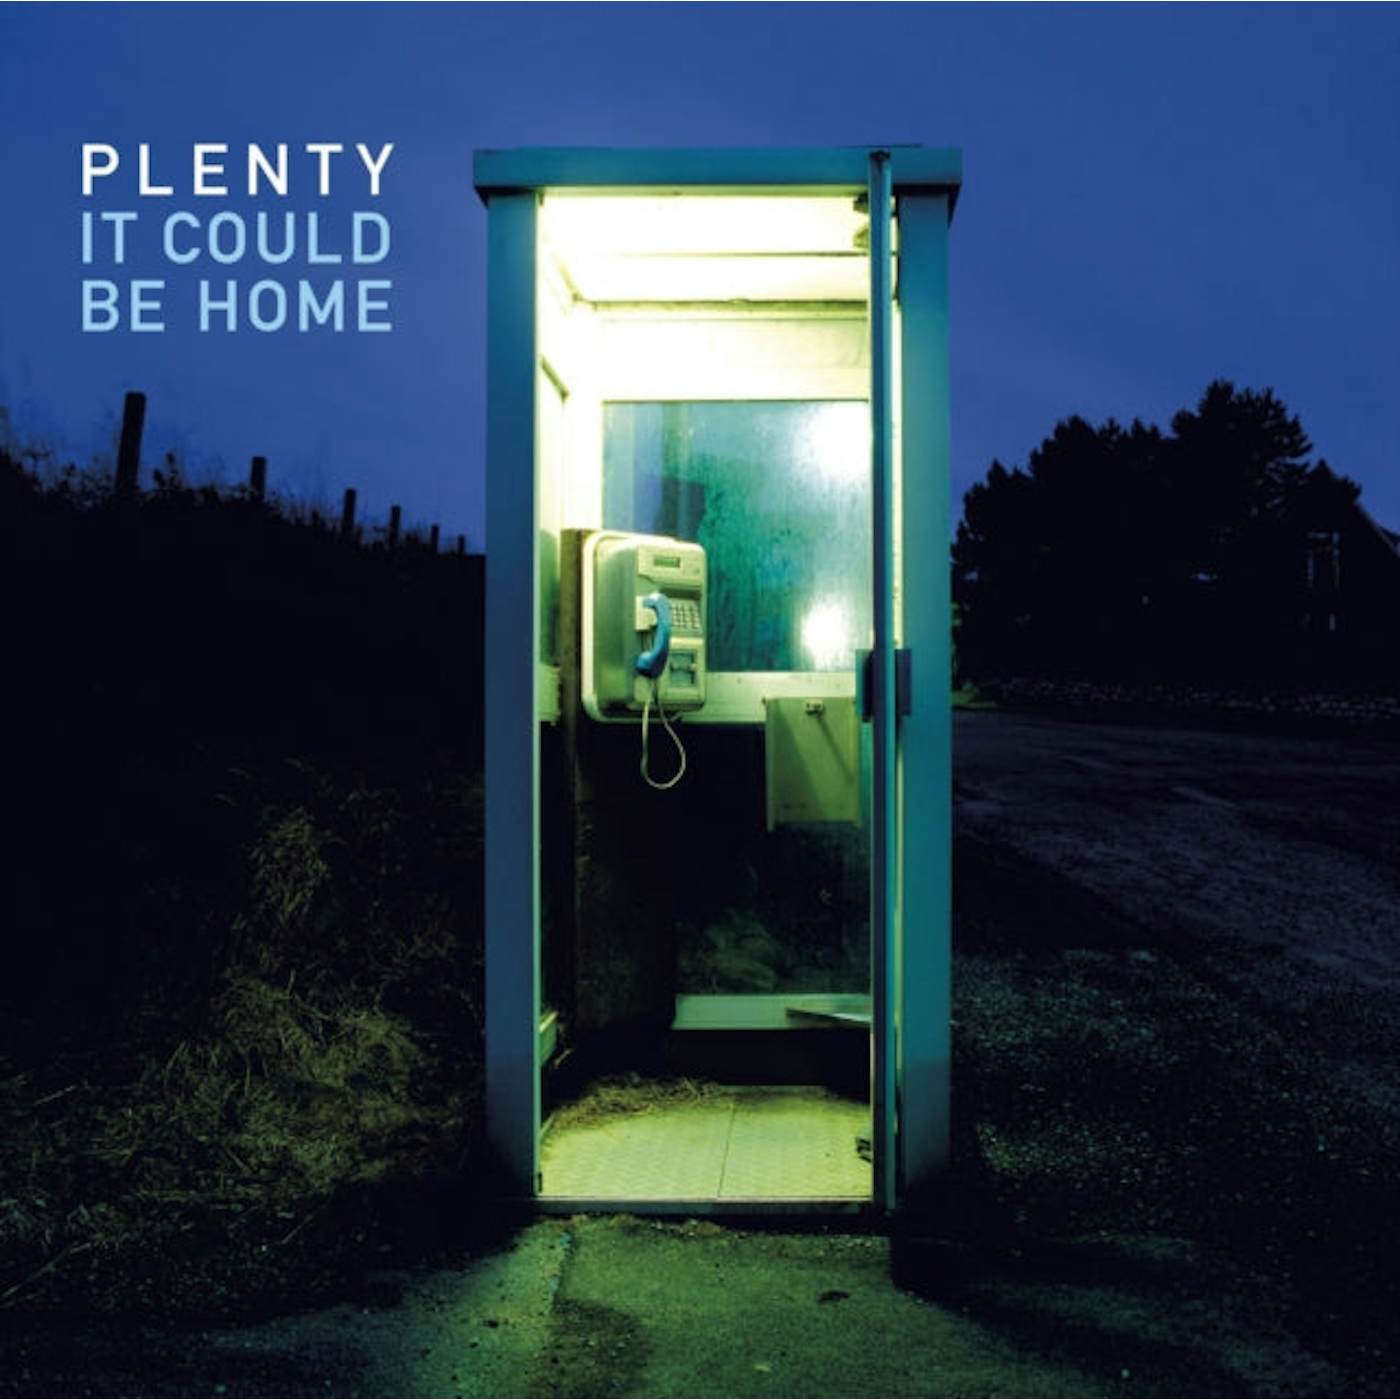 Plenty CD - It Could Be Home